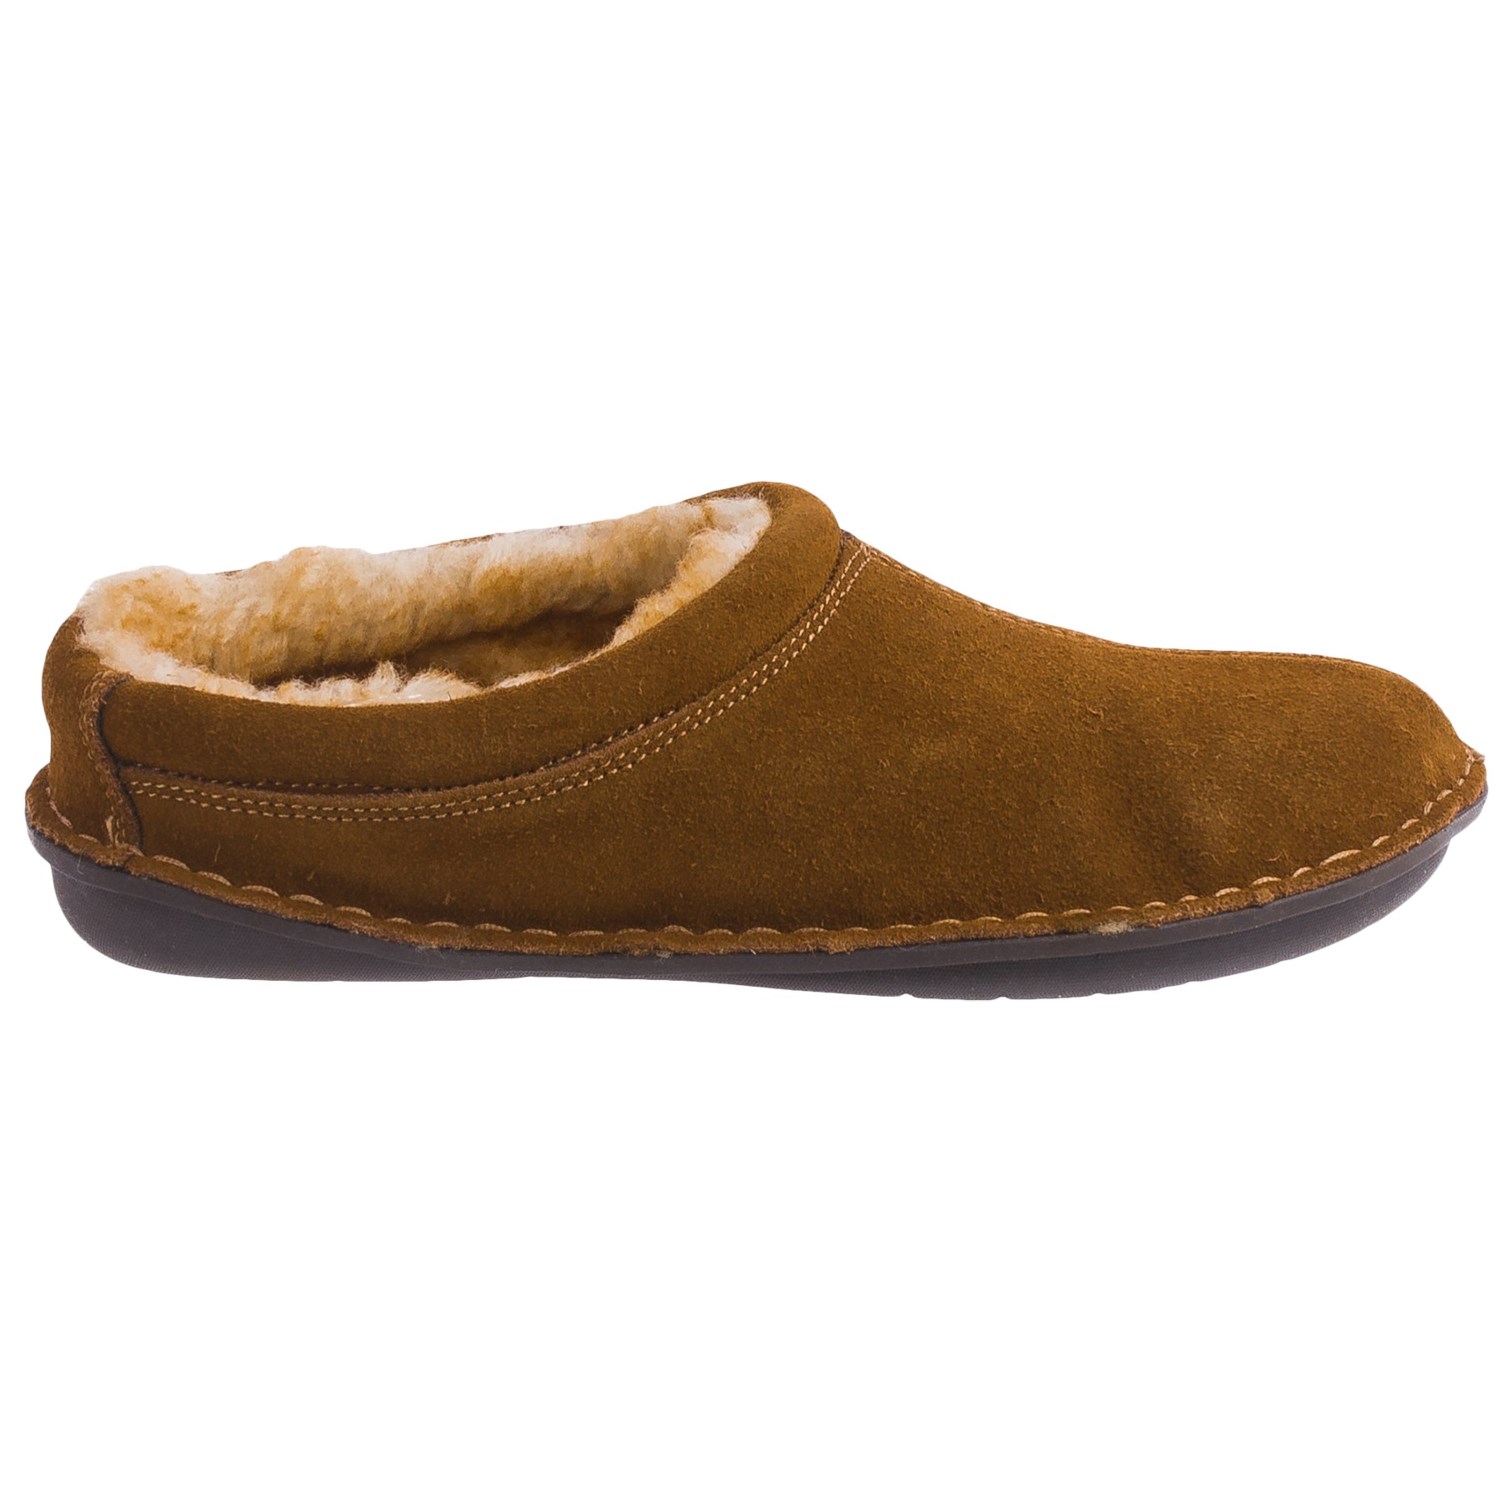 Tempur-Pedic Isobar Suede Clog Slippers (For Men) - Save 44%